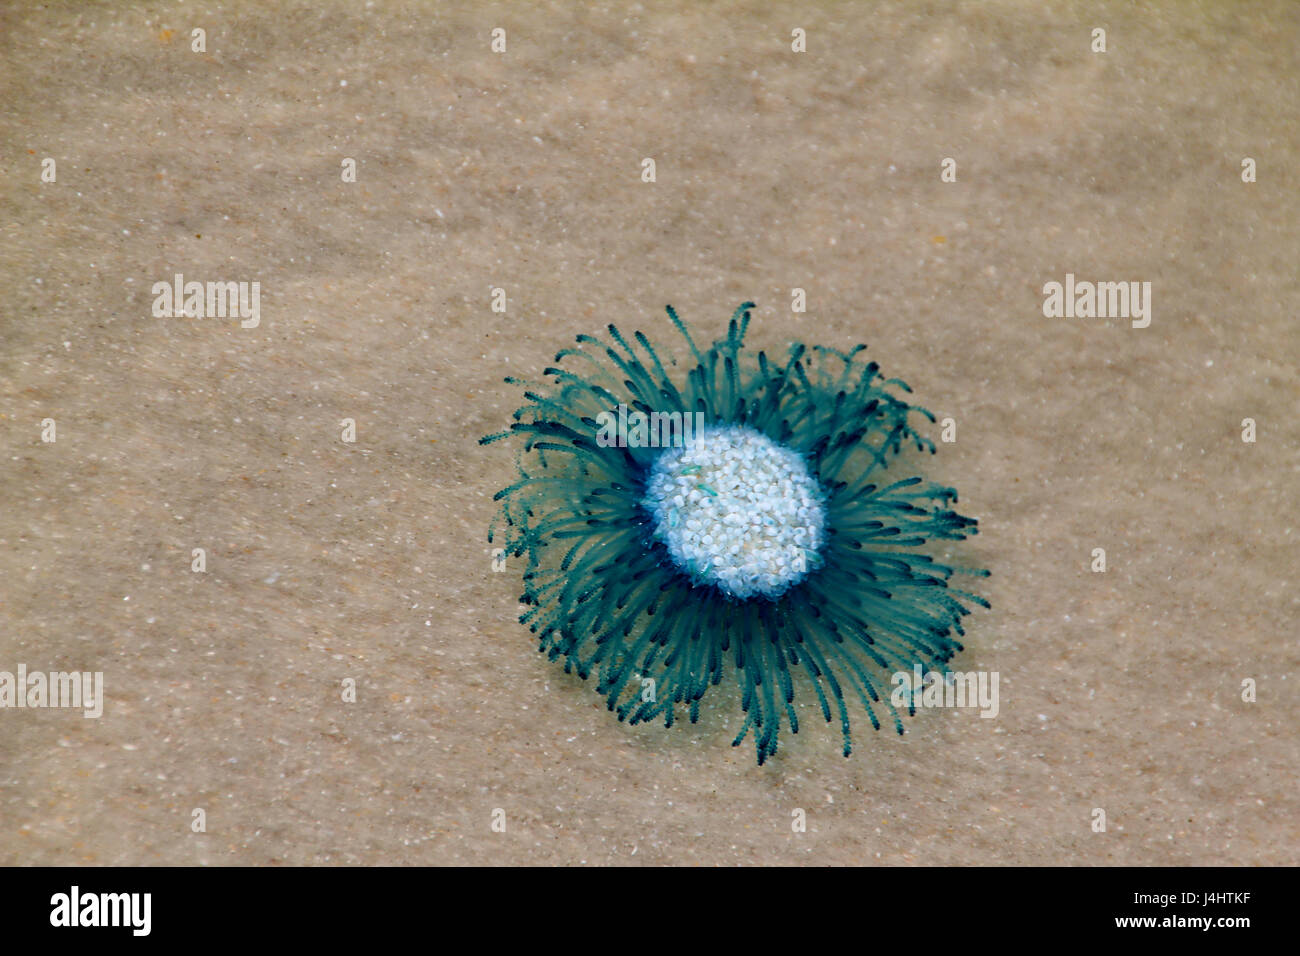 Blue Button Jellyfish washes up on shore in Florida. Stock Photo